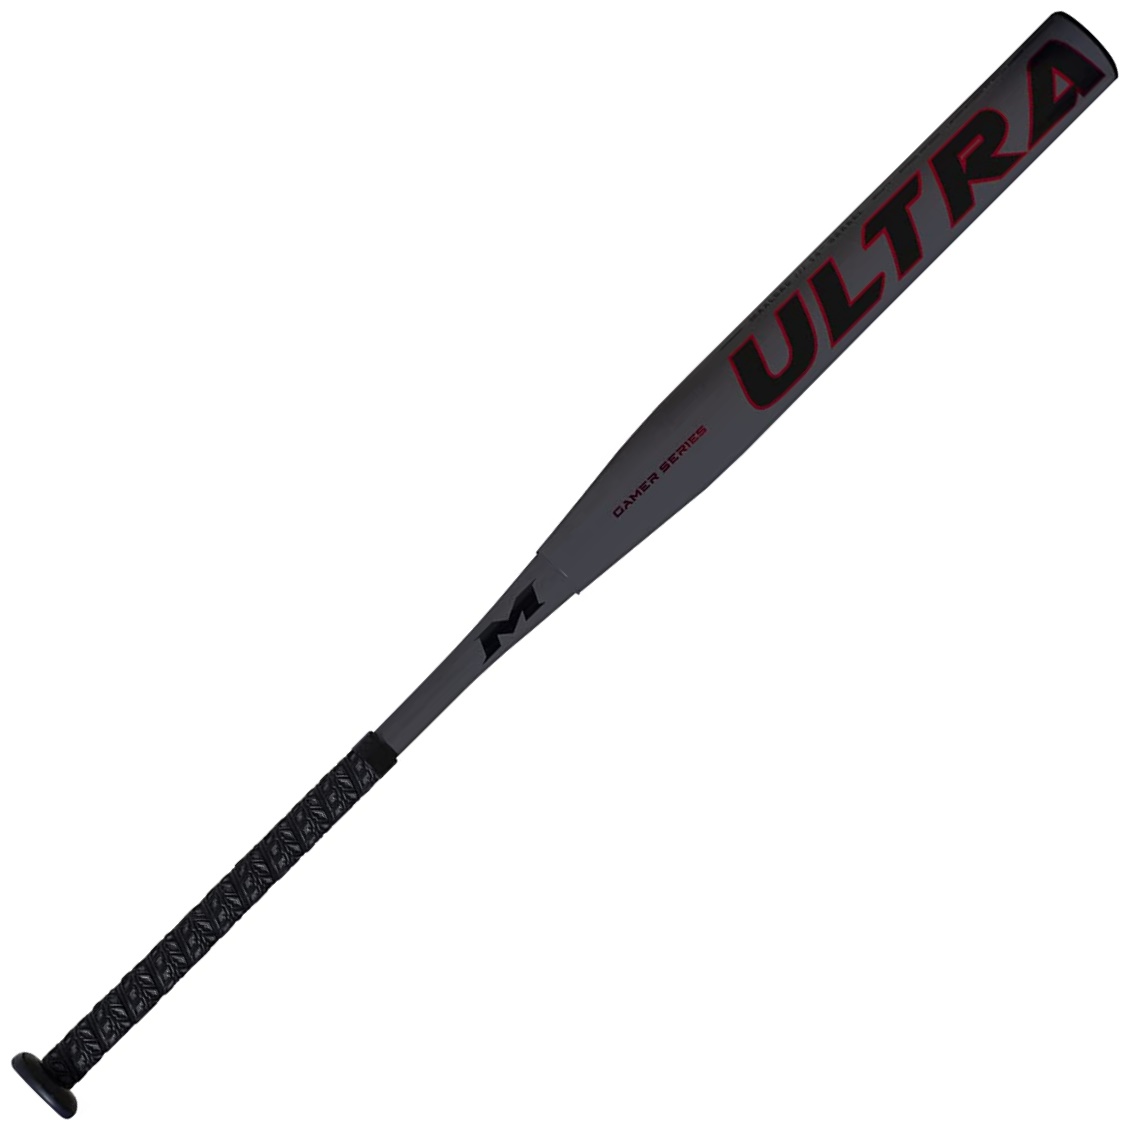 miken-ultra-gamer-series-two-piece-maxload-14-barrel-ssusa-slowpitch-softball-bat-34-inch-28-oz MUL21S-3-28   <span data-mce-fragment=1>The New Miken Ultra Gamer Series offers one of the